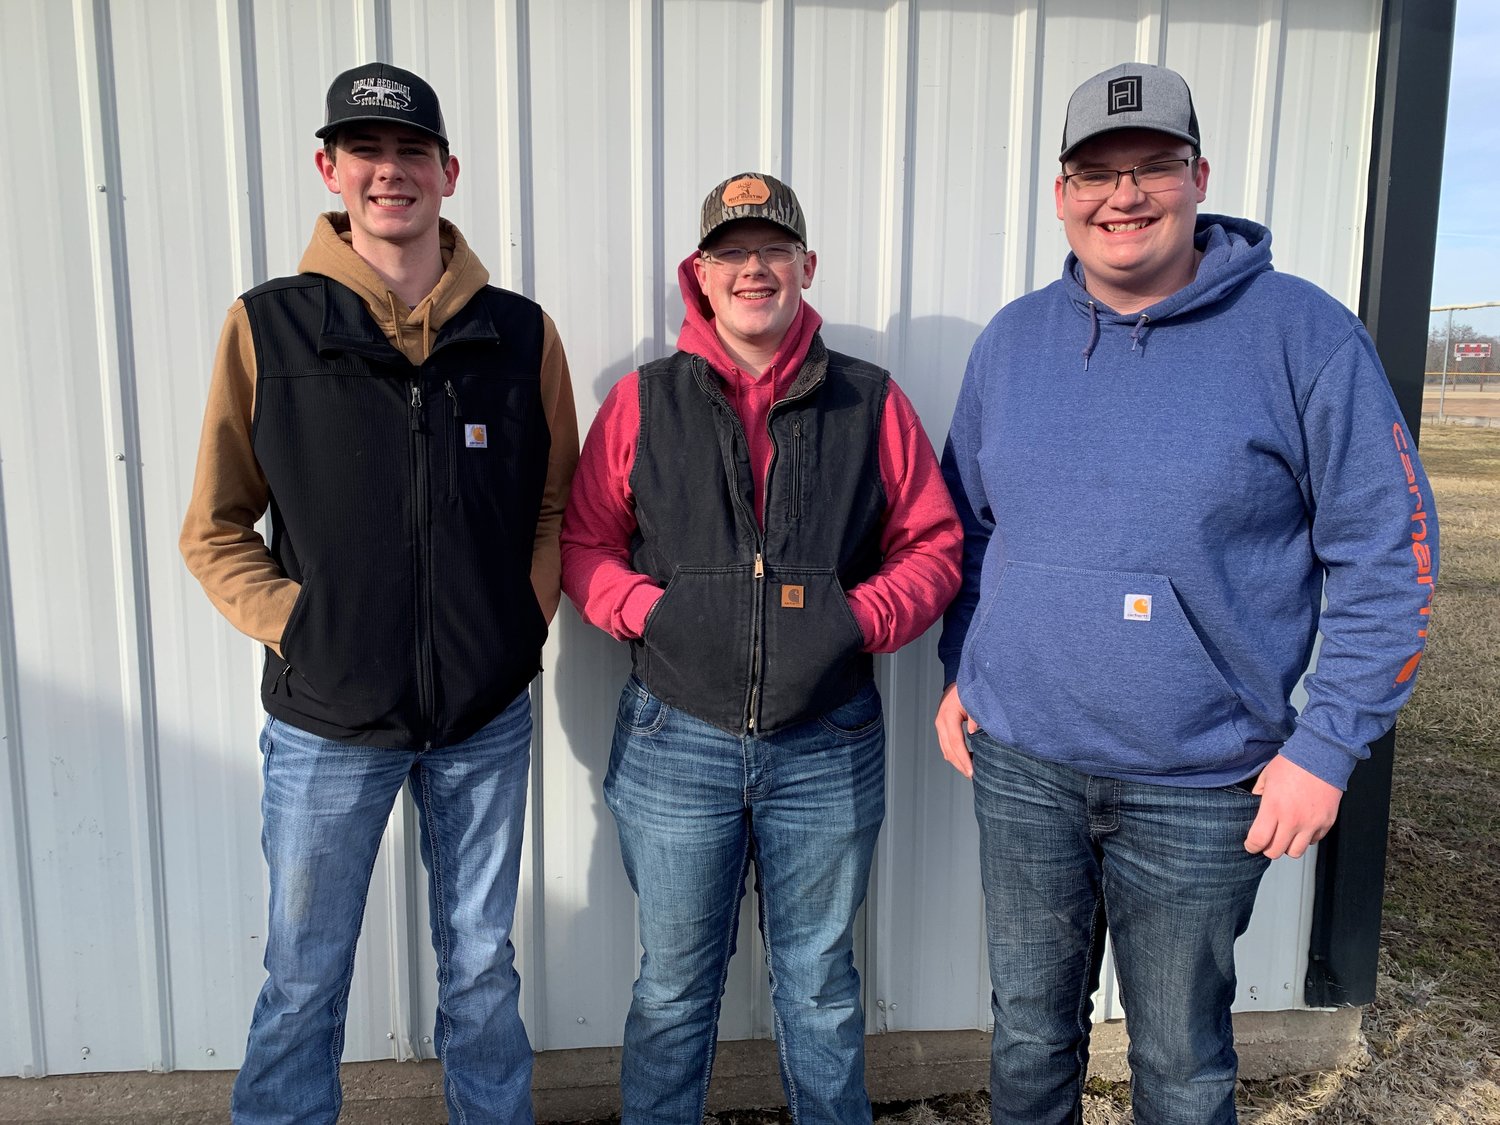 The team of Tucker Robnett, Pacey Cope and Lance Fort earned second place at the 4-H state Meats Judging Contest. [Contributed photo]